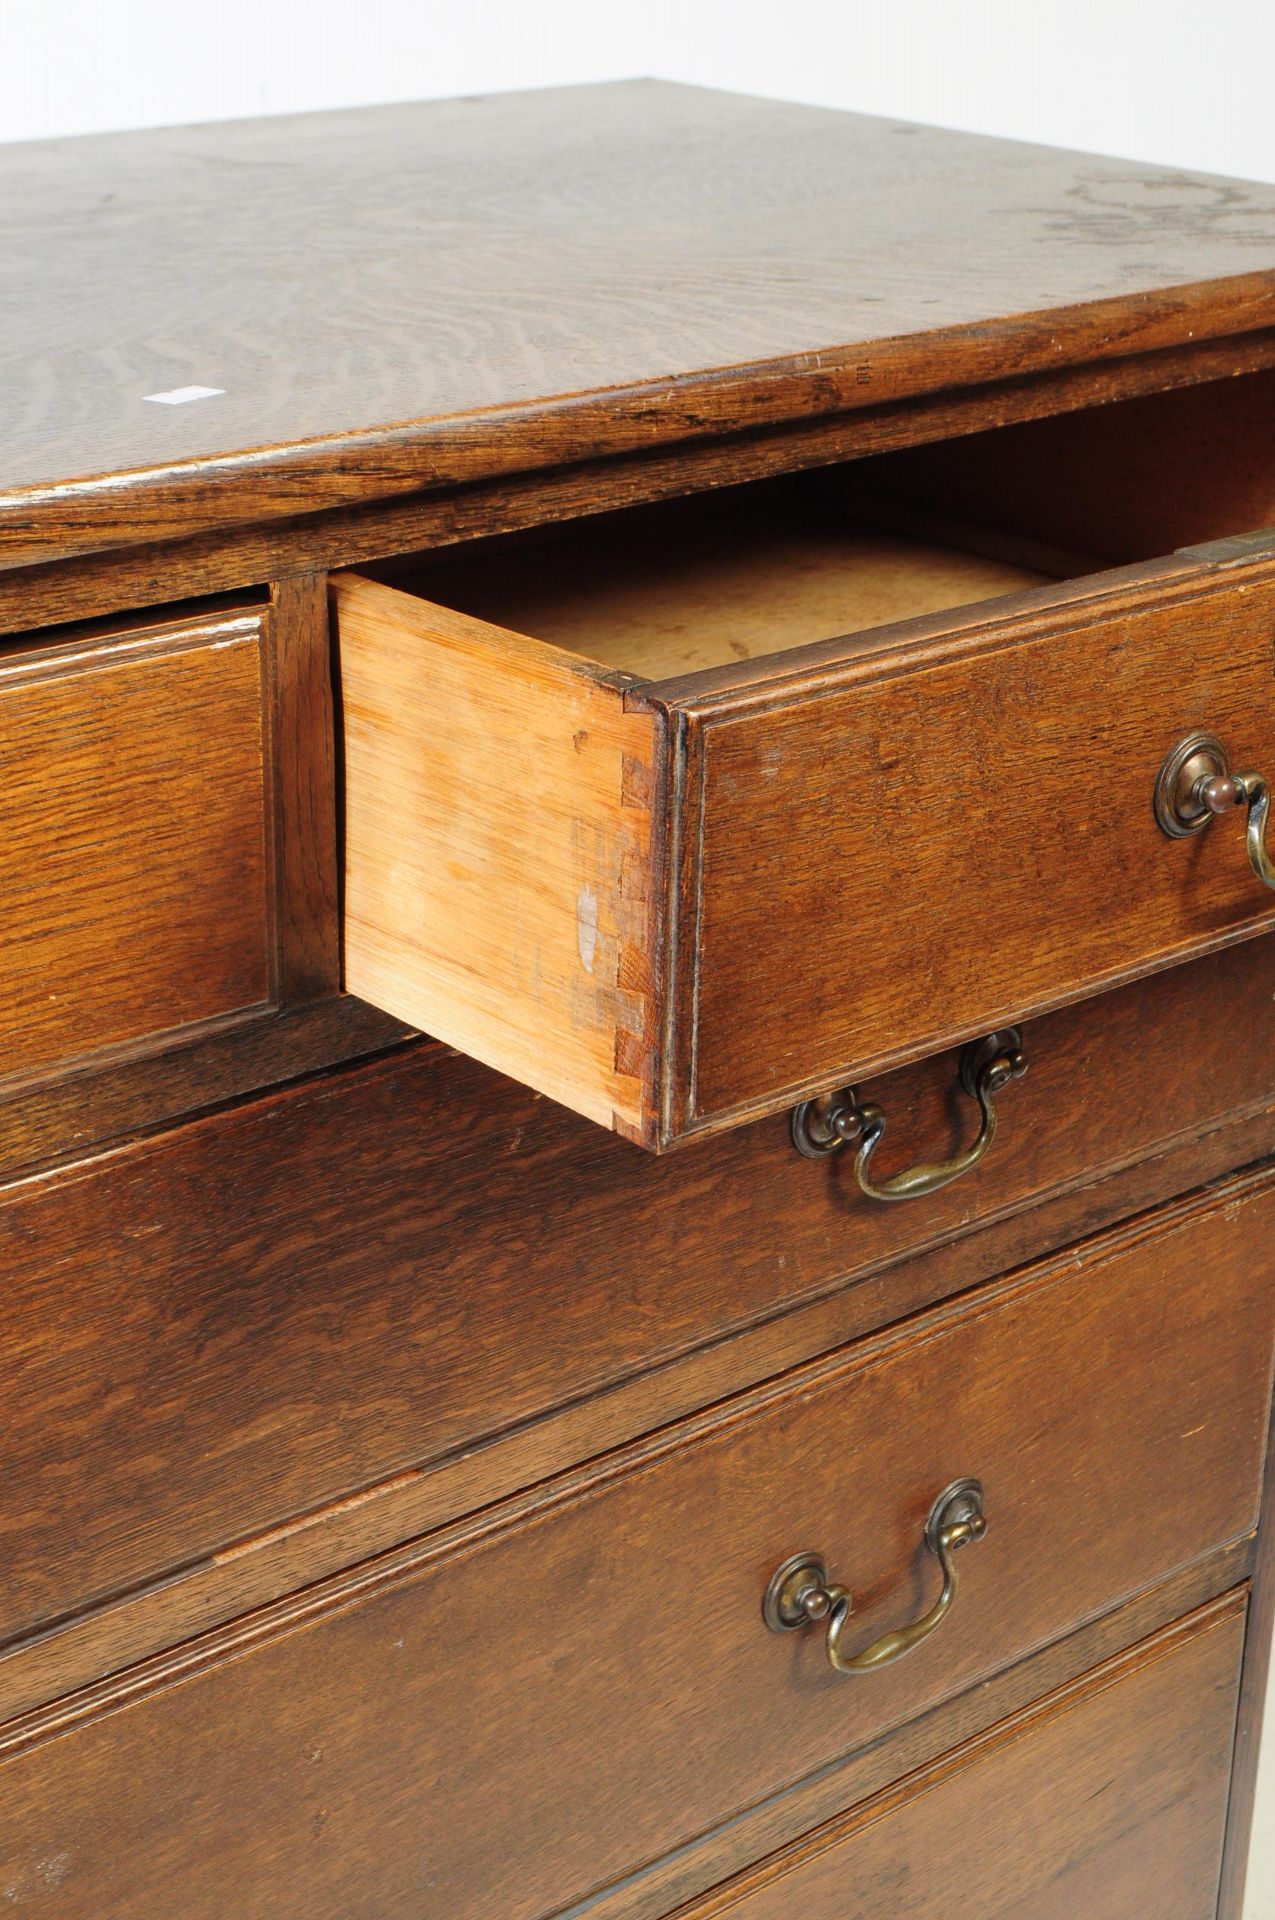 EARLY 20TH CENTURY GEORGE III MANNER OAK CHEST OF DRAWERS - Image 3 of 4